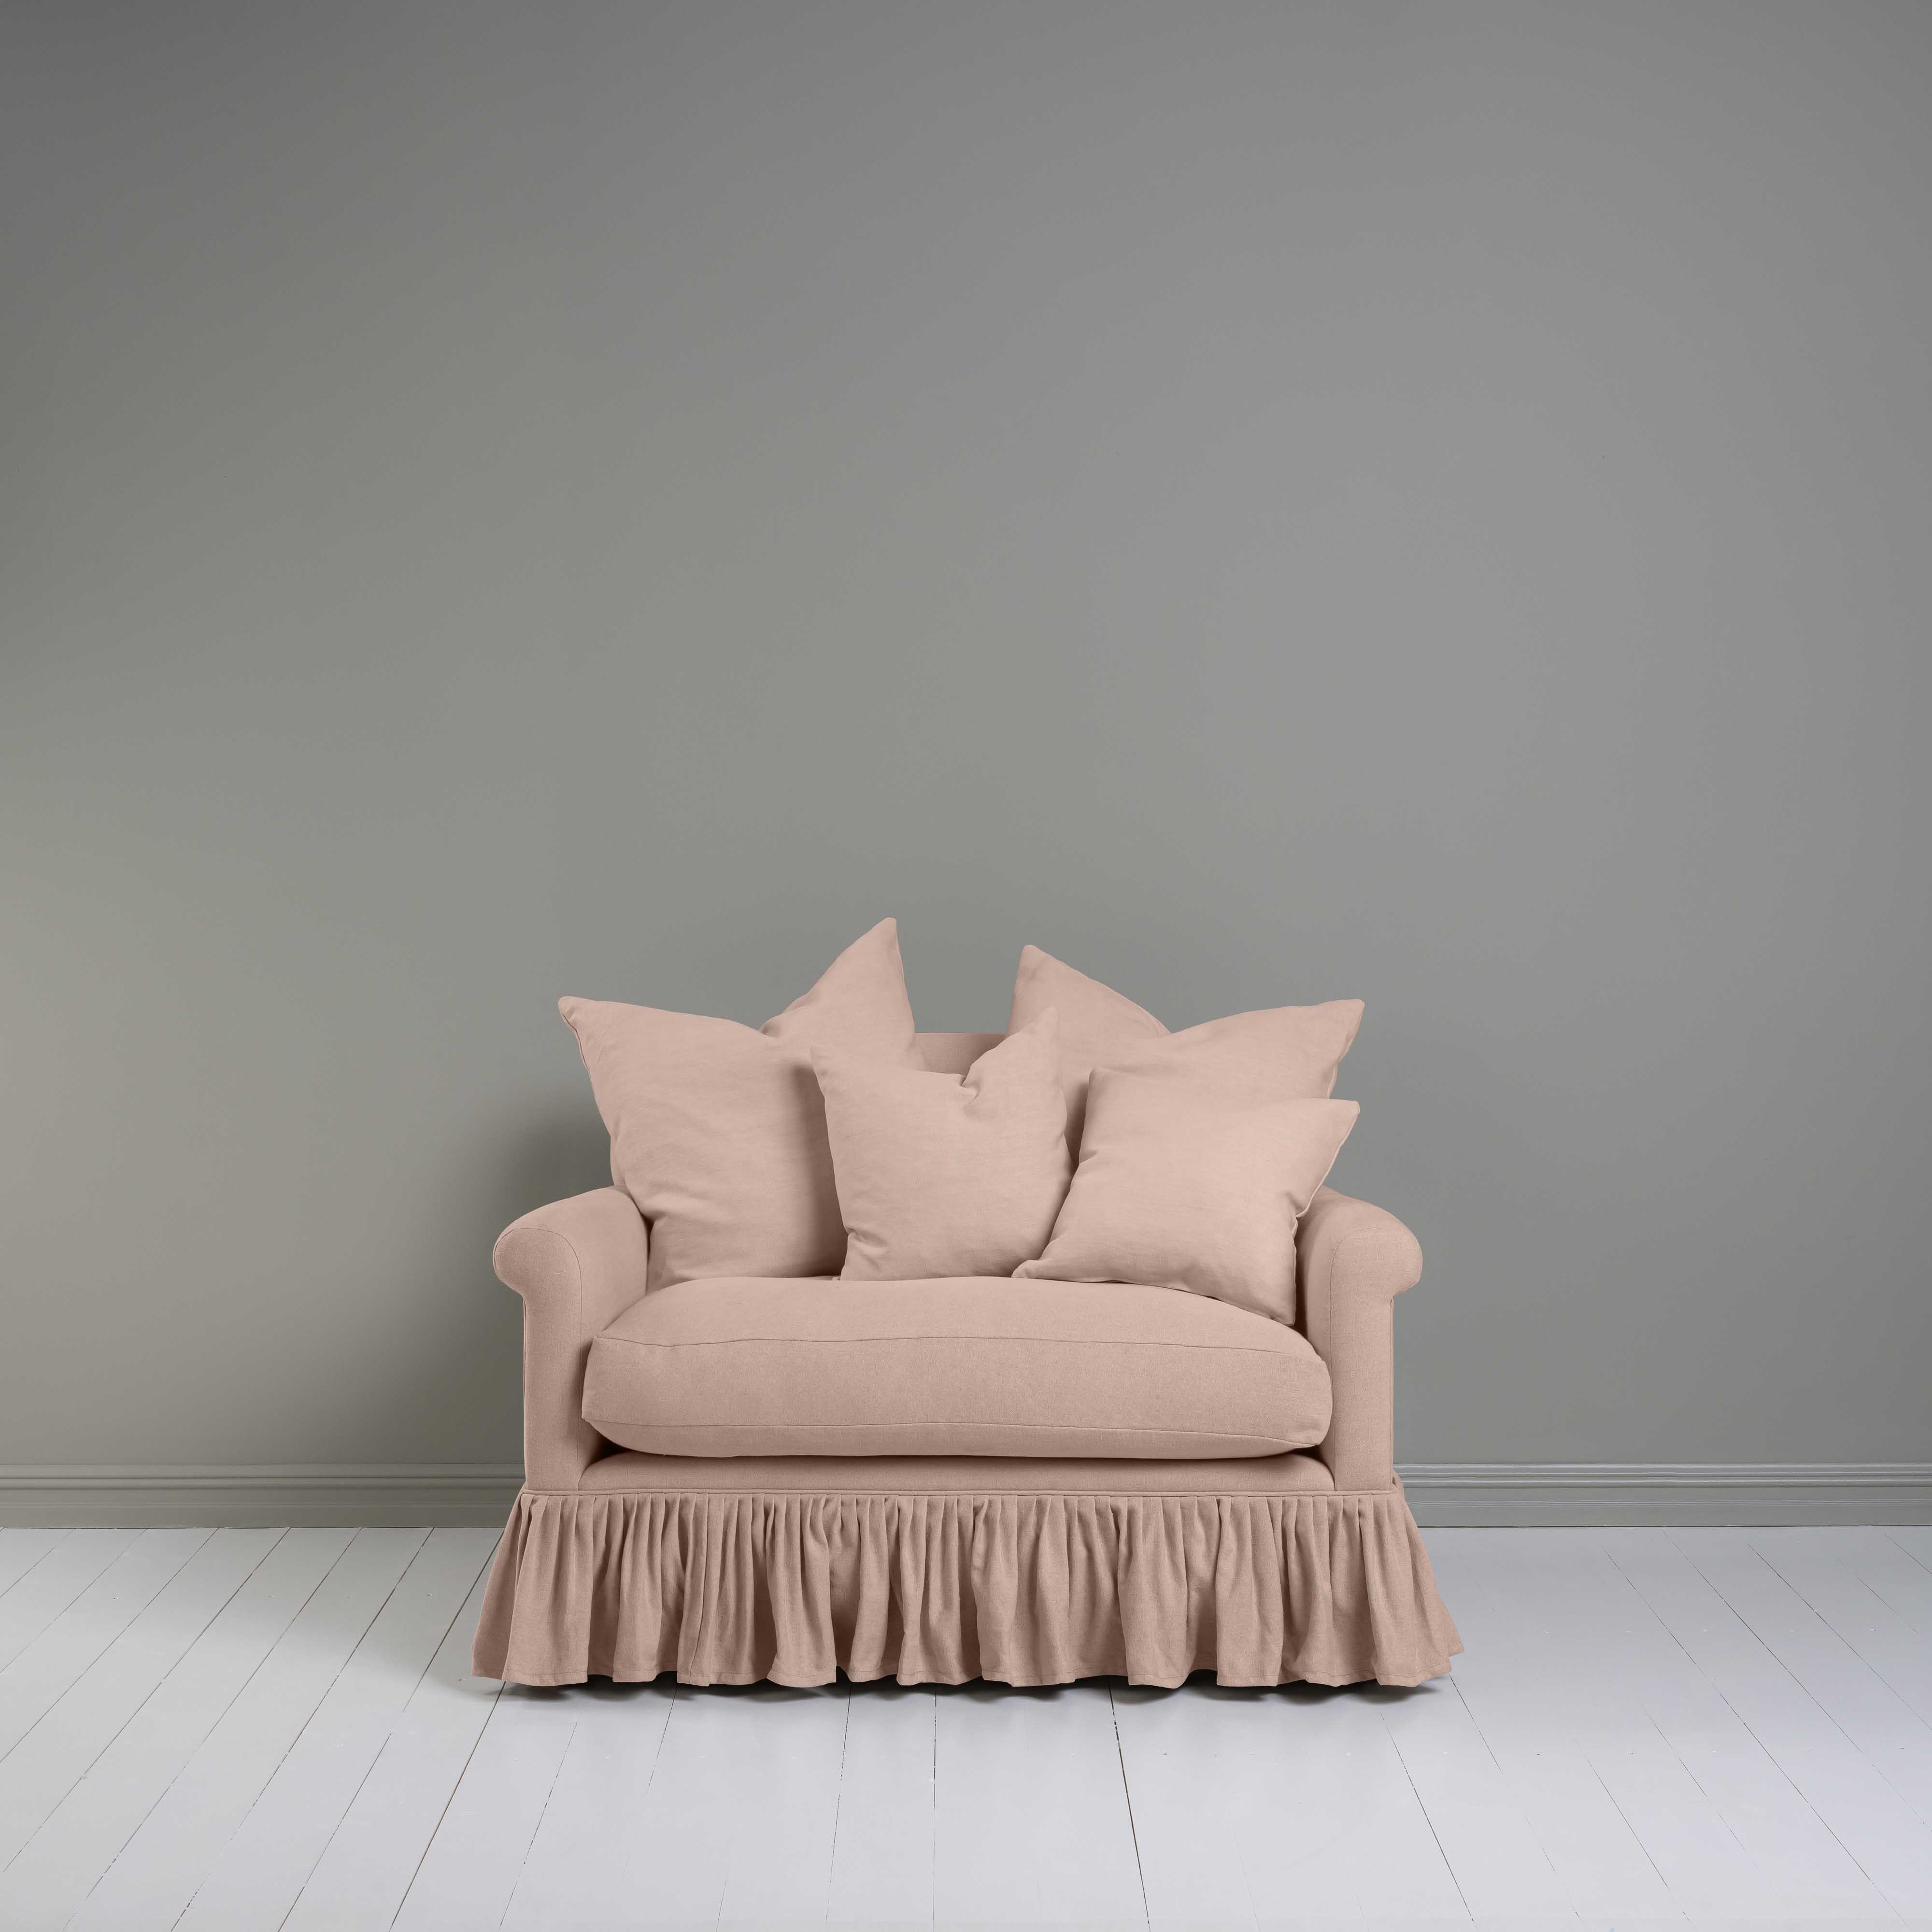  Curtain Call Love Seat in Laidback Linen Dusky Pink 